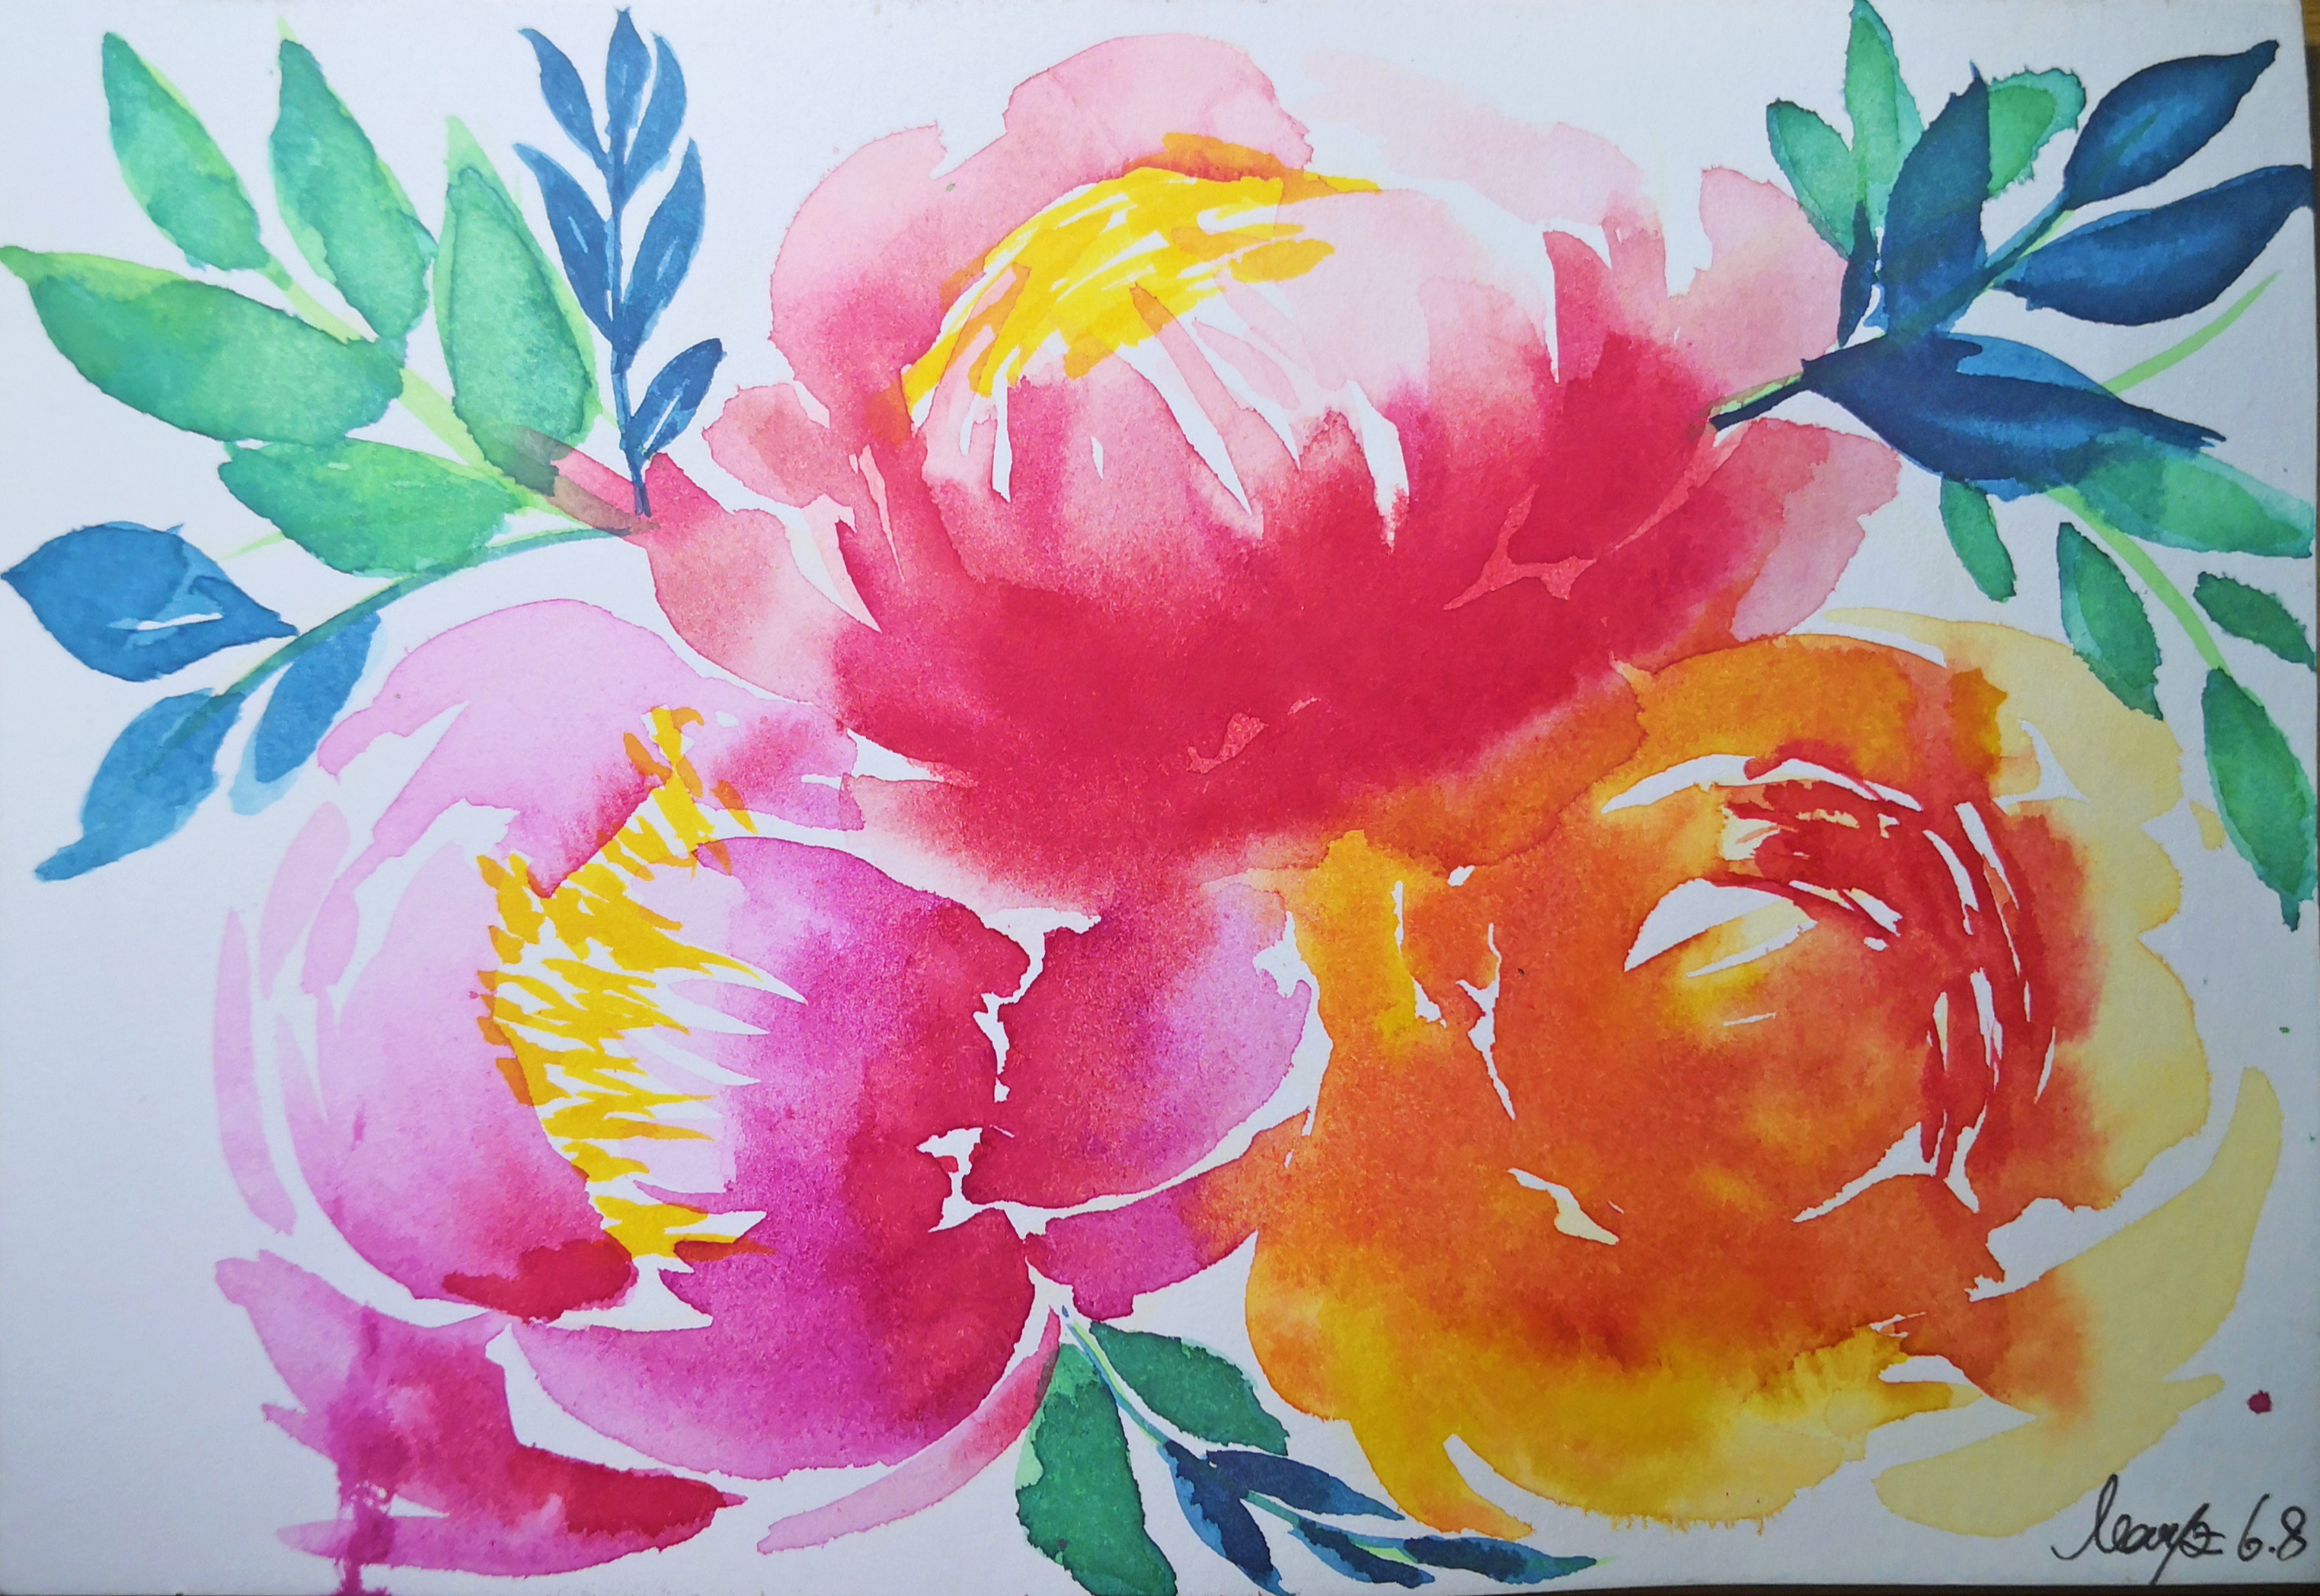 How to draw a watercolor rose and peony flower step by step easy